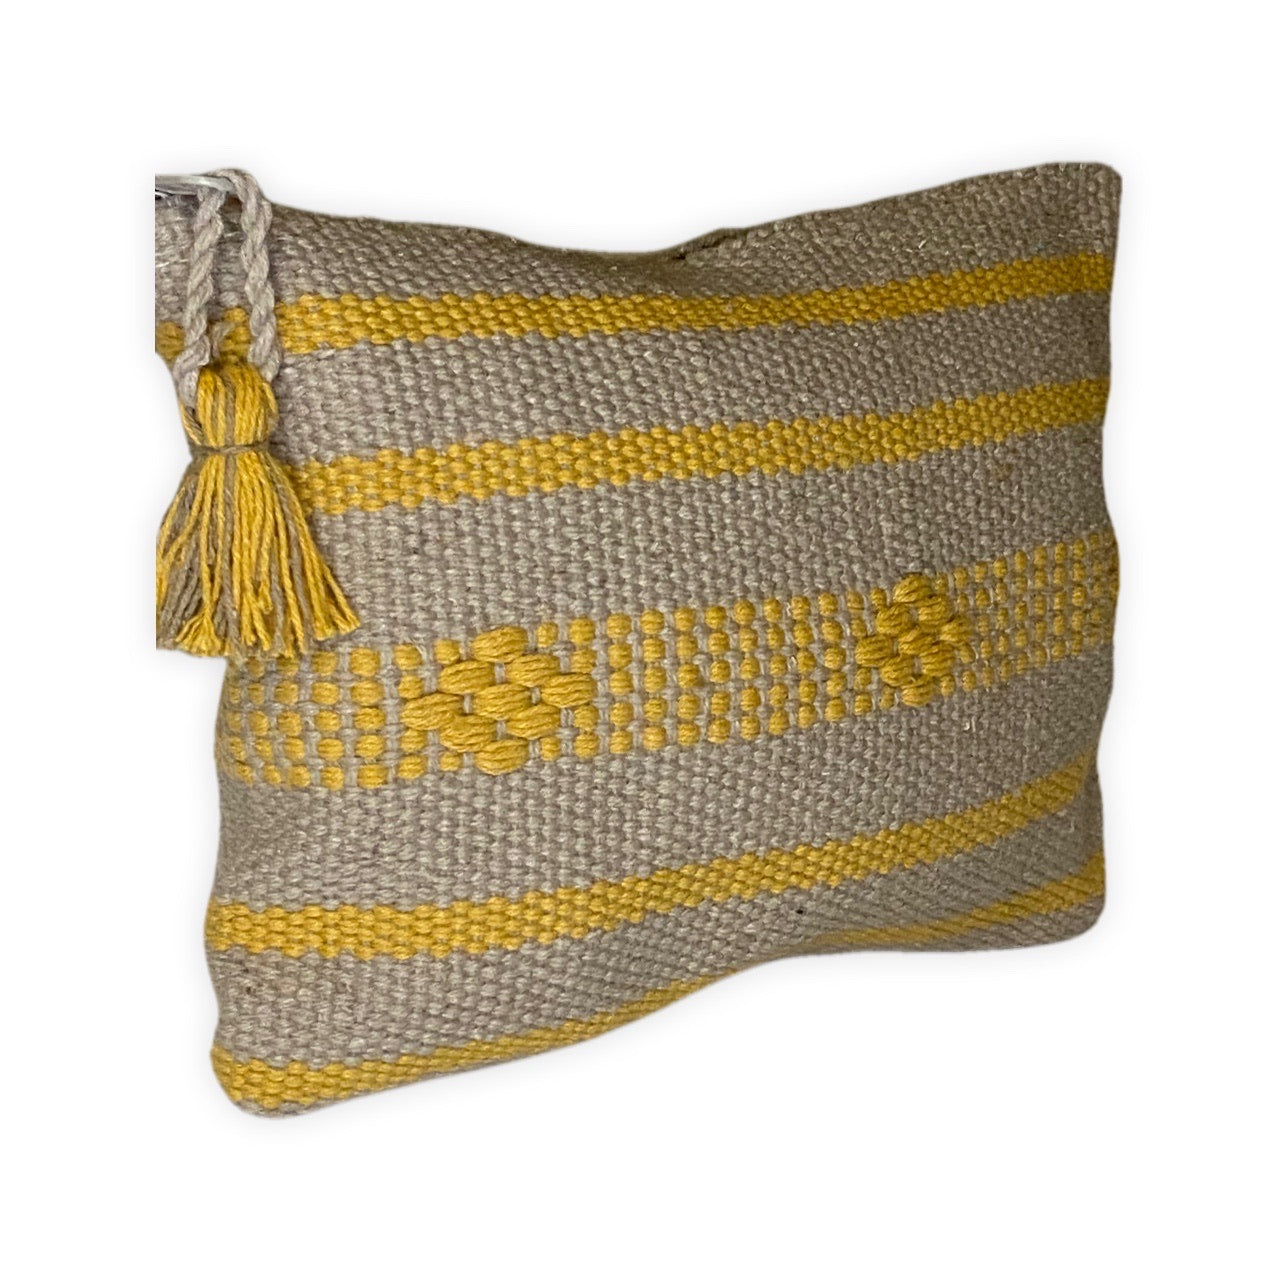 Handwoven grey and mustard yellow cotton pouch with traditional brocade patterns, featuring side tassels and crafted by Oaxacan artisan Alejandrina.